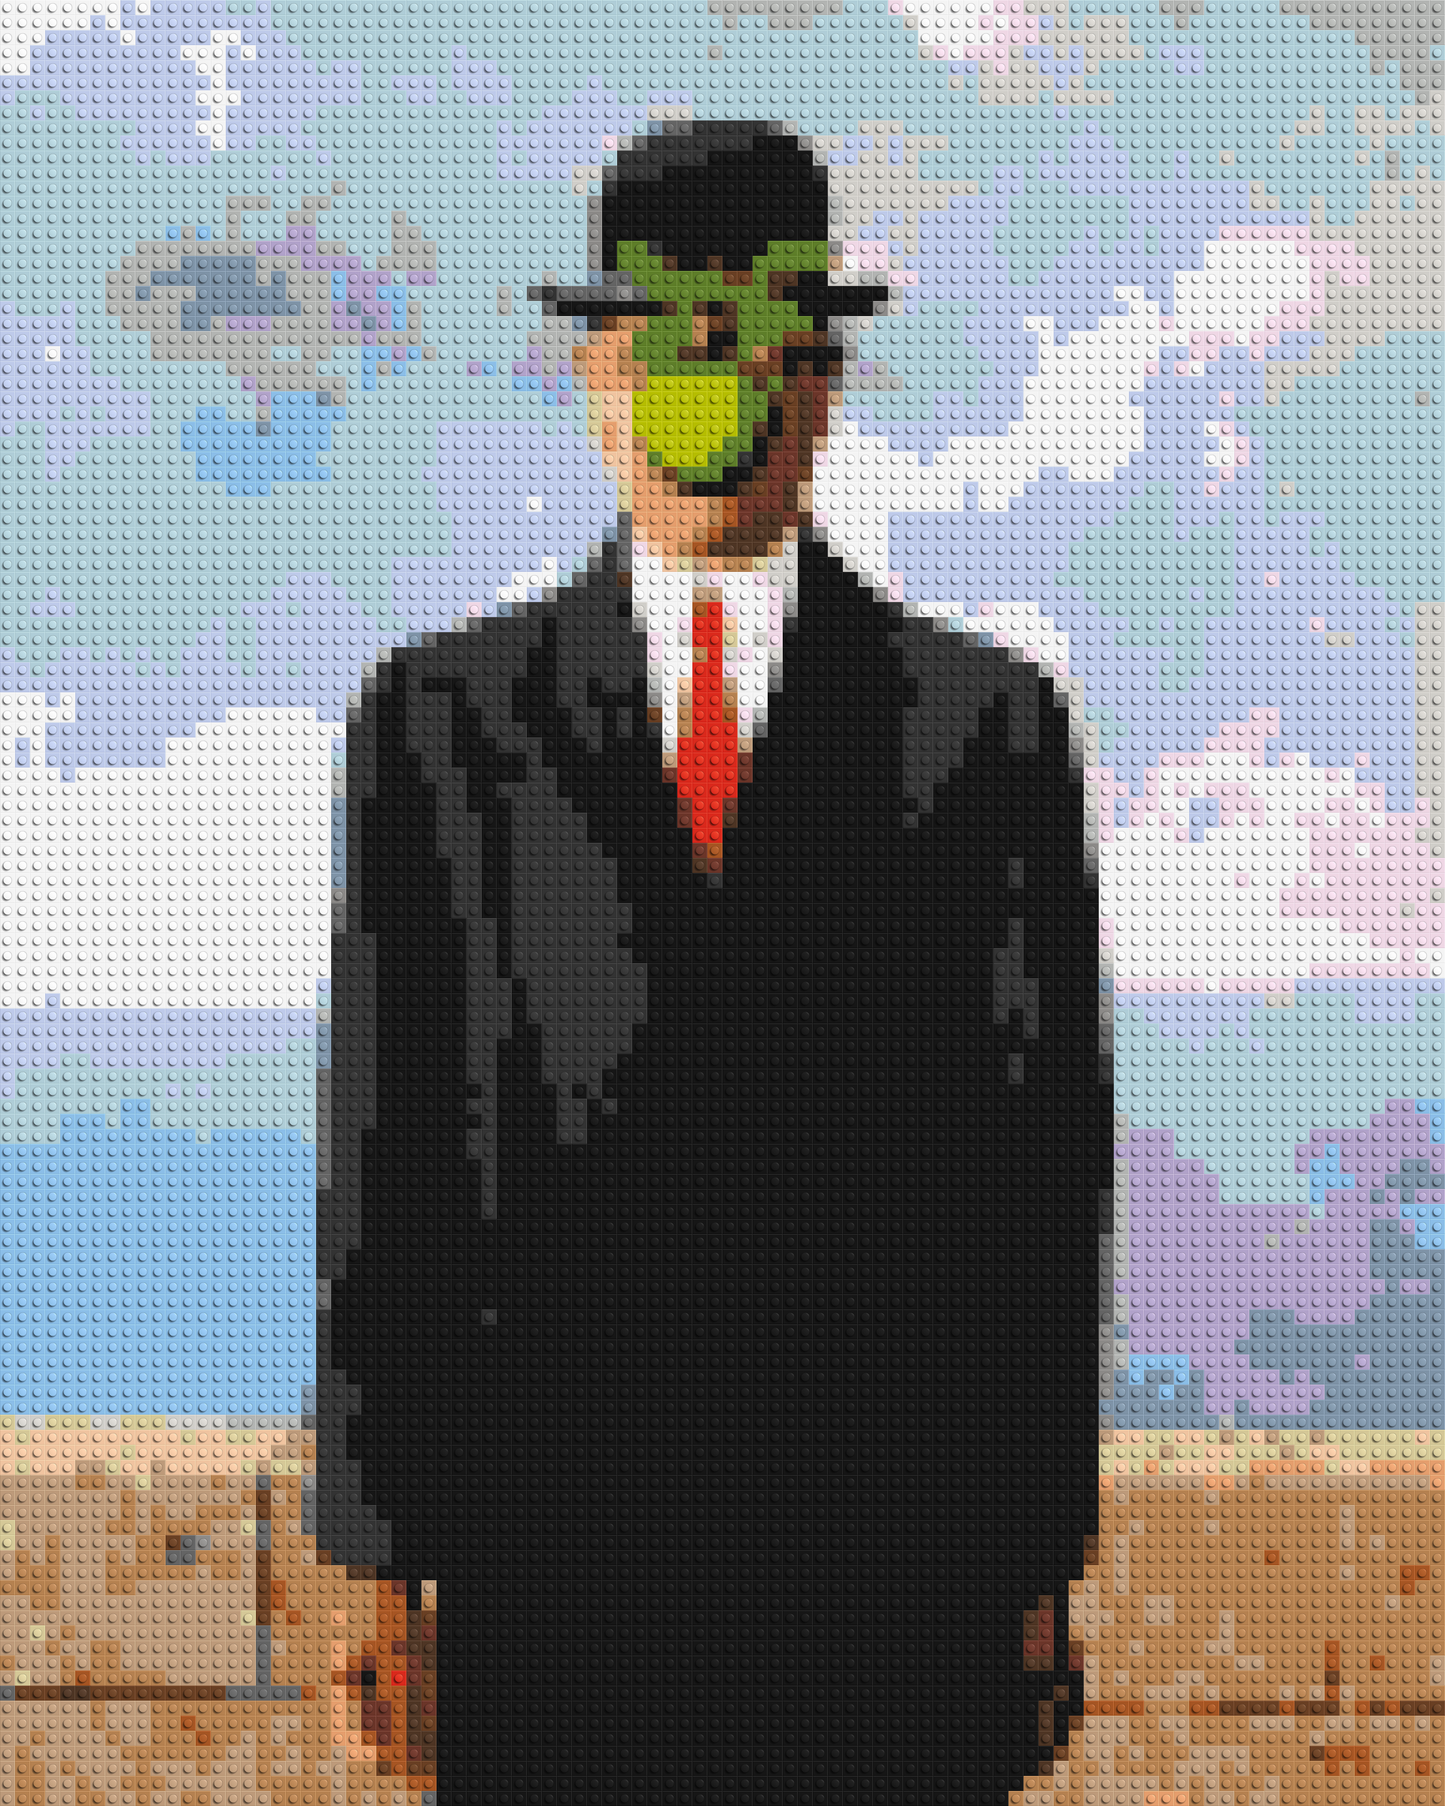 The Son of Man by René Magritte - Brick Art Mosaic Kit 4x5 large